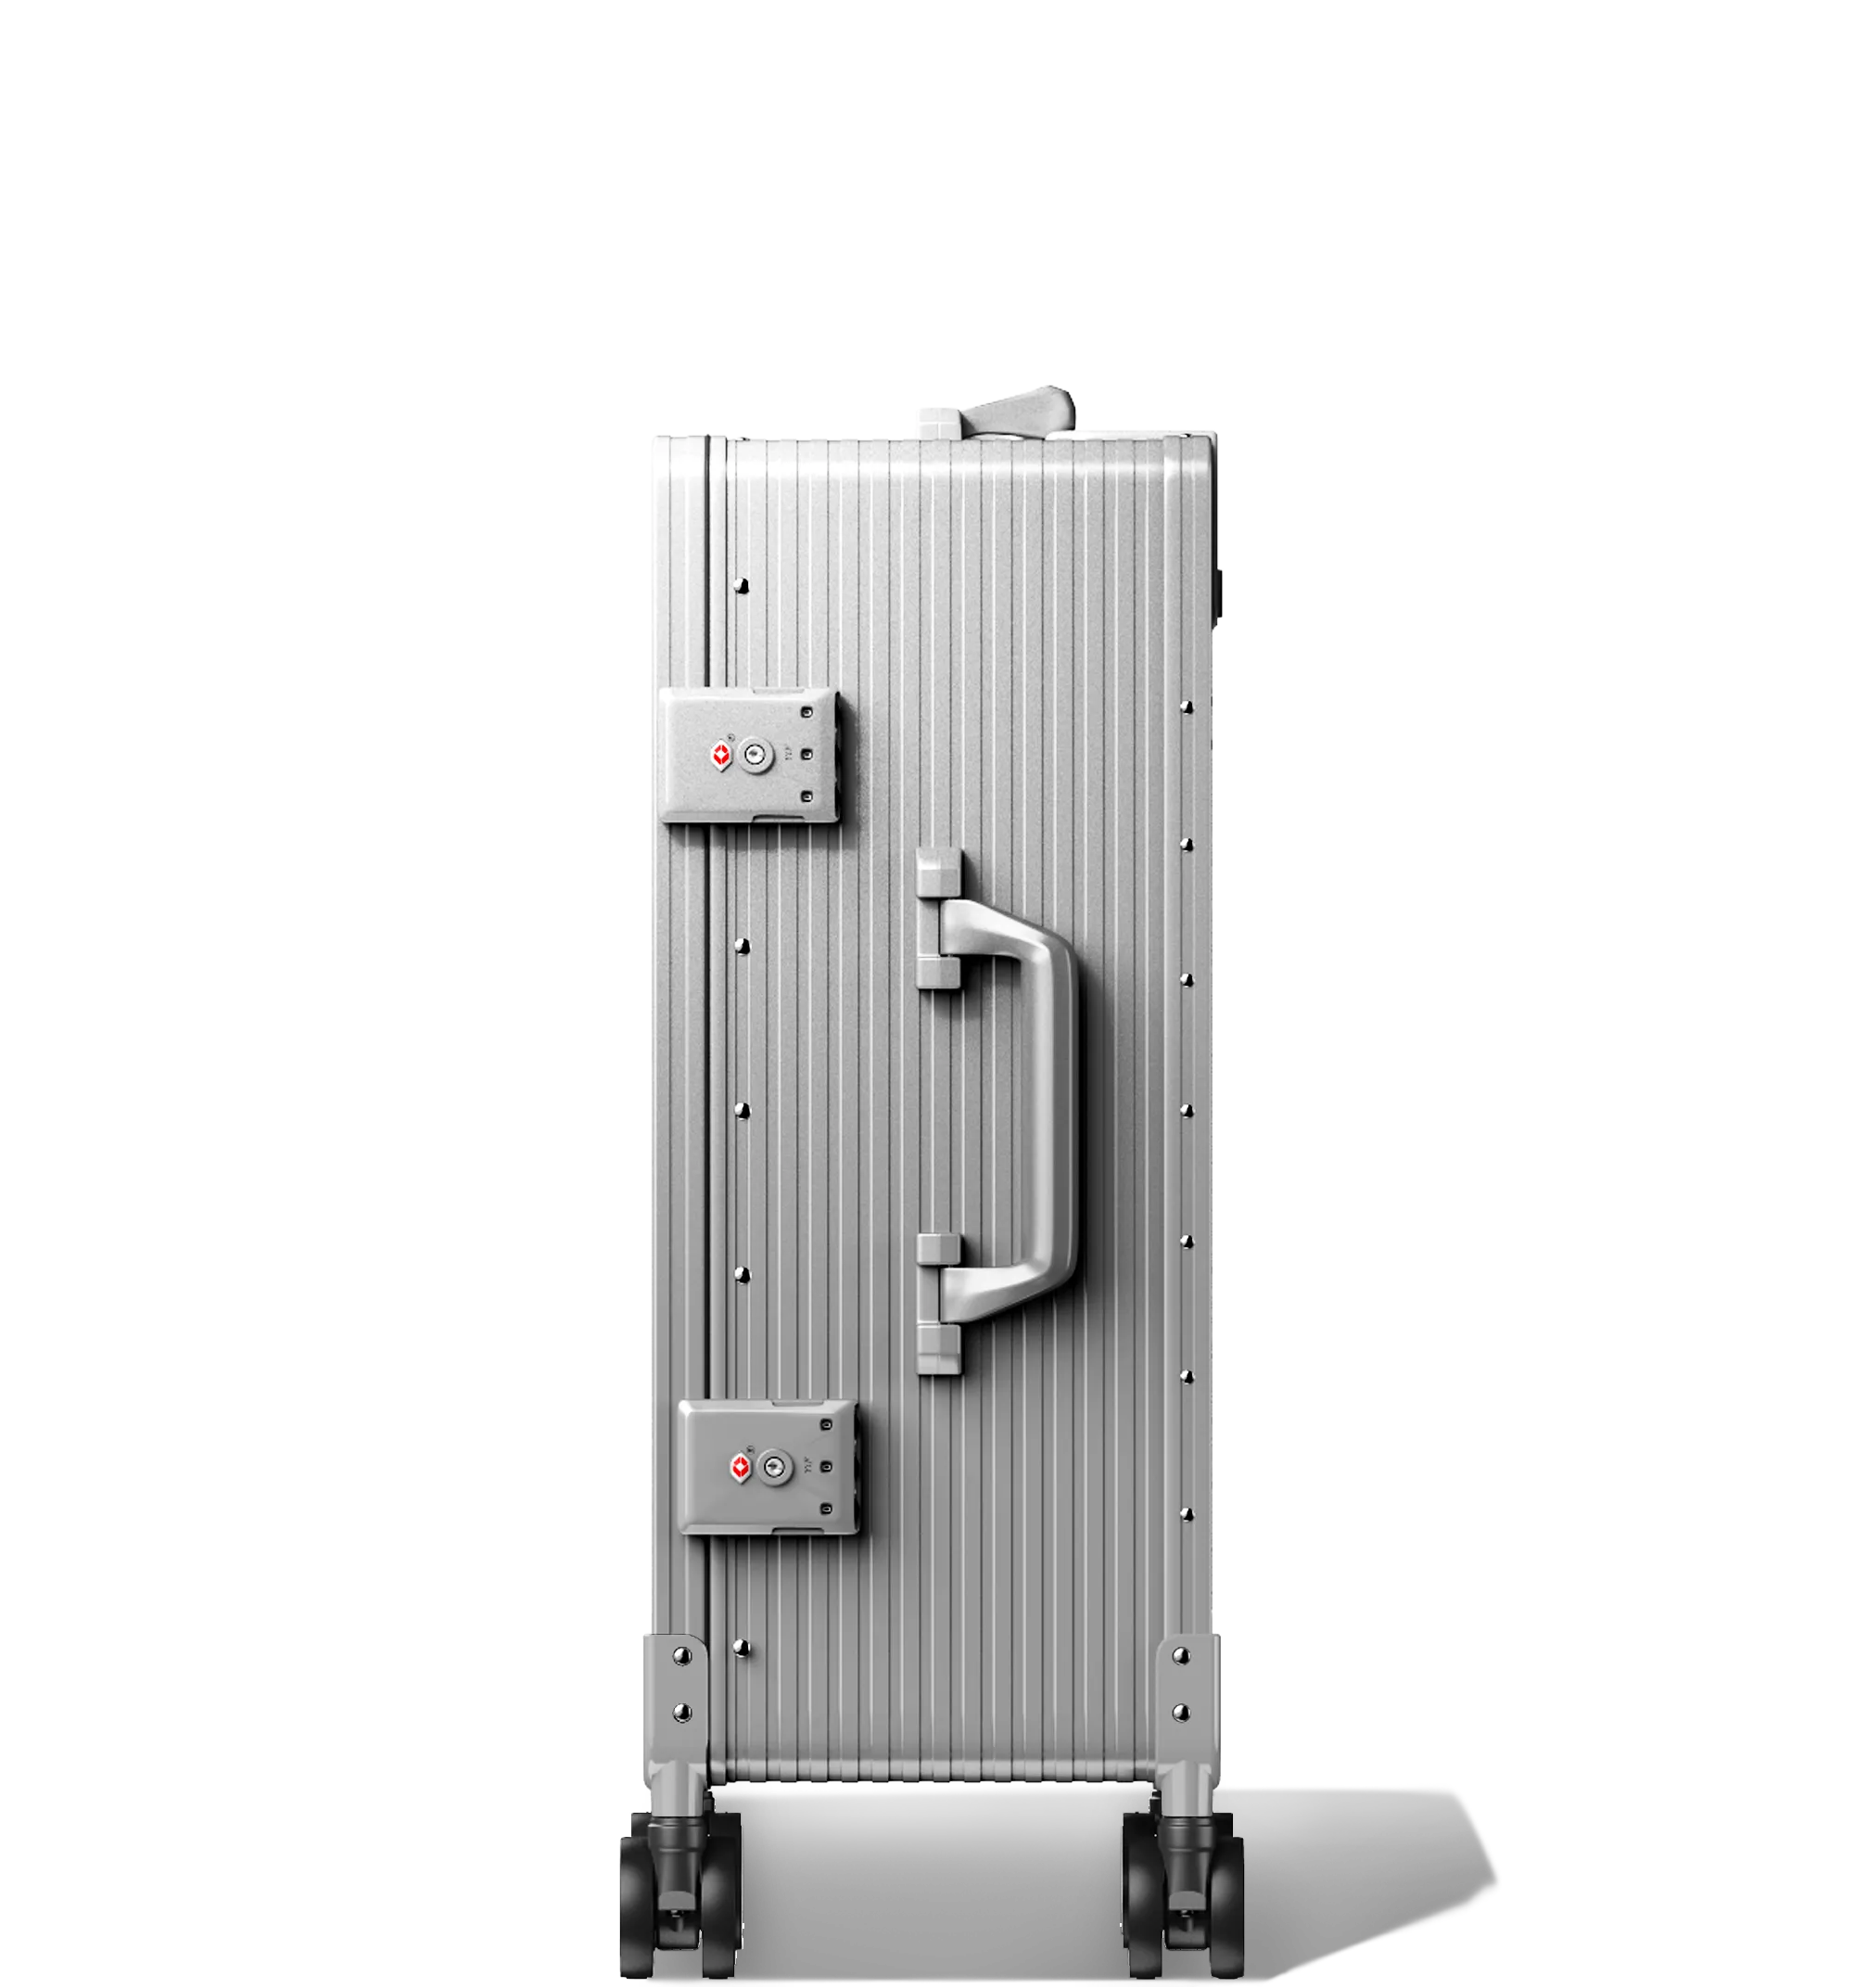 A silver Cabin In 56/20 hard-shell aluminium Luggage standing upright with ribbed texture, side and top carry handles, two TSA-approved combination locks, and four spinning wheels, against a white background.